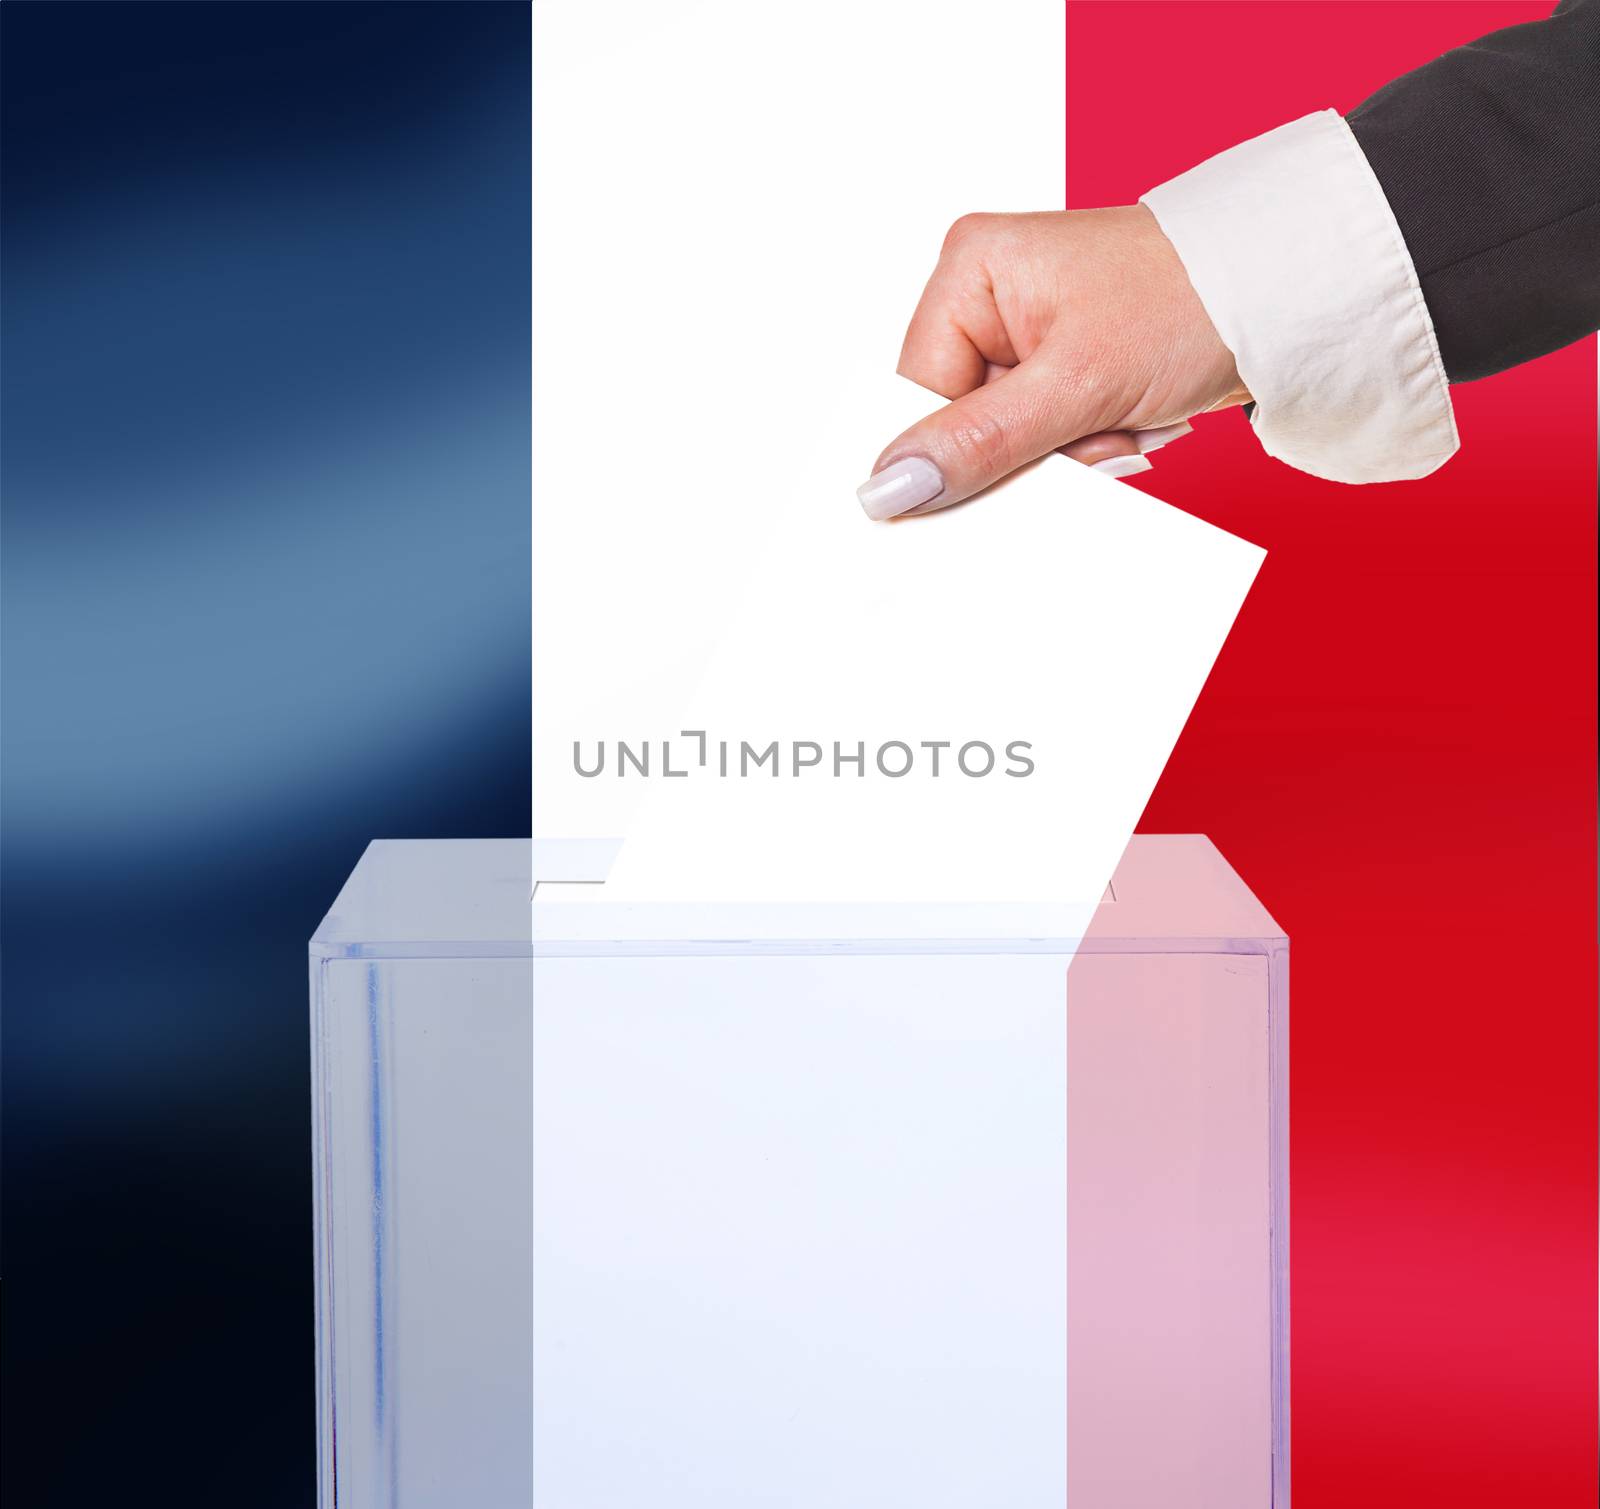 electoral vote by ballot, under the France flag